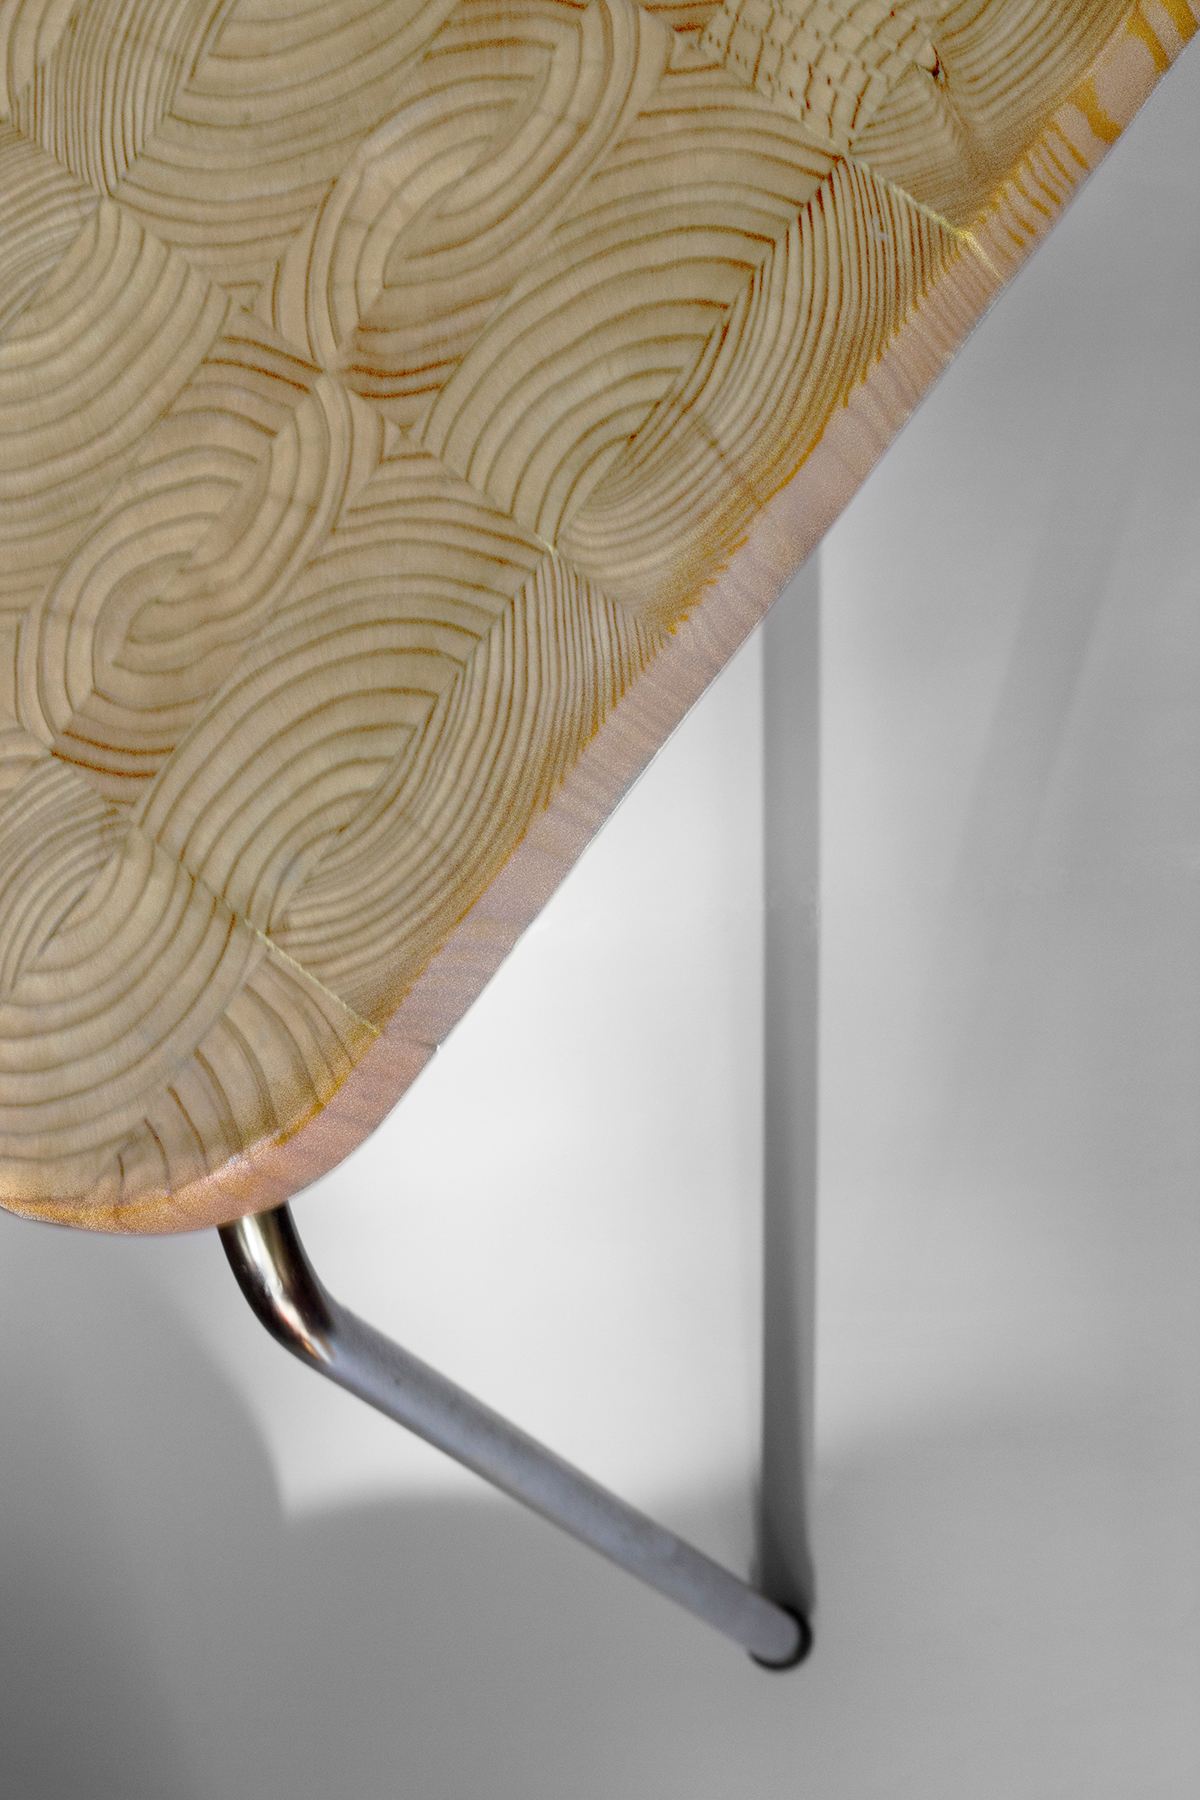 product design  wood design chair hand made